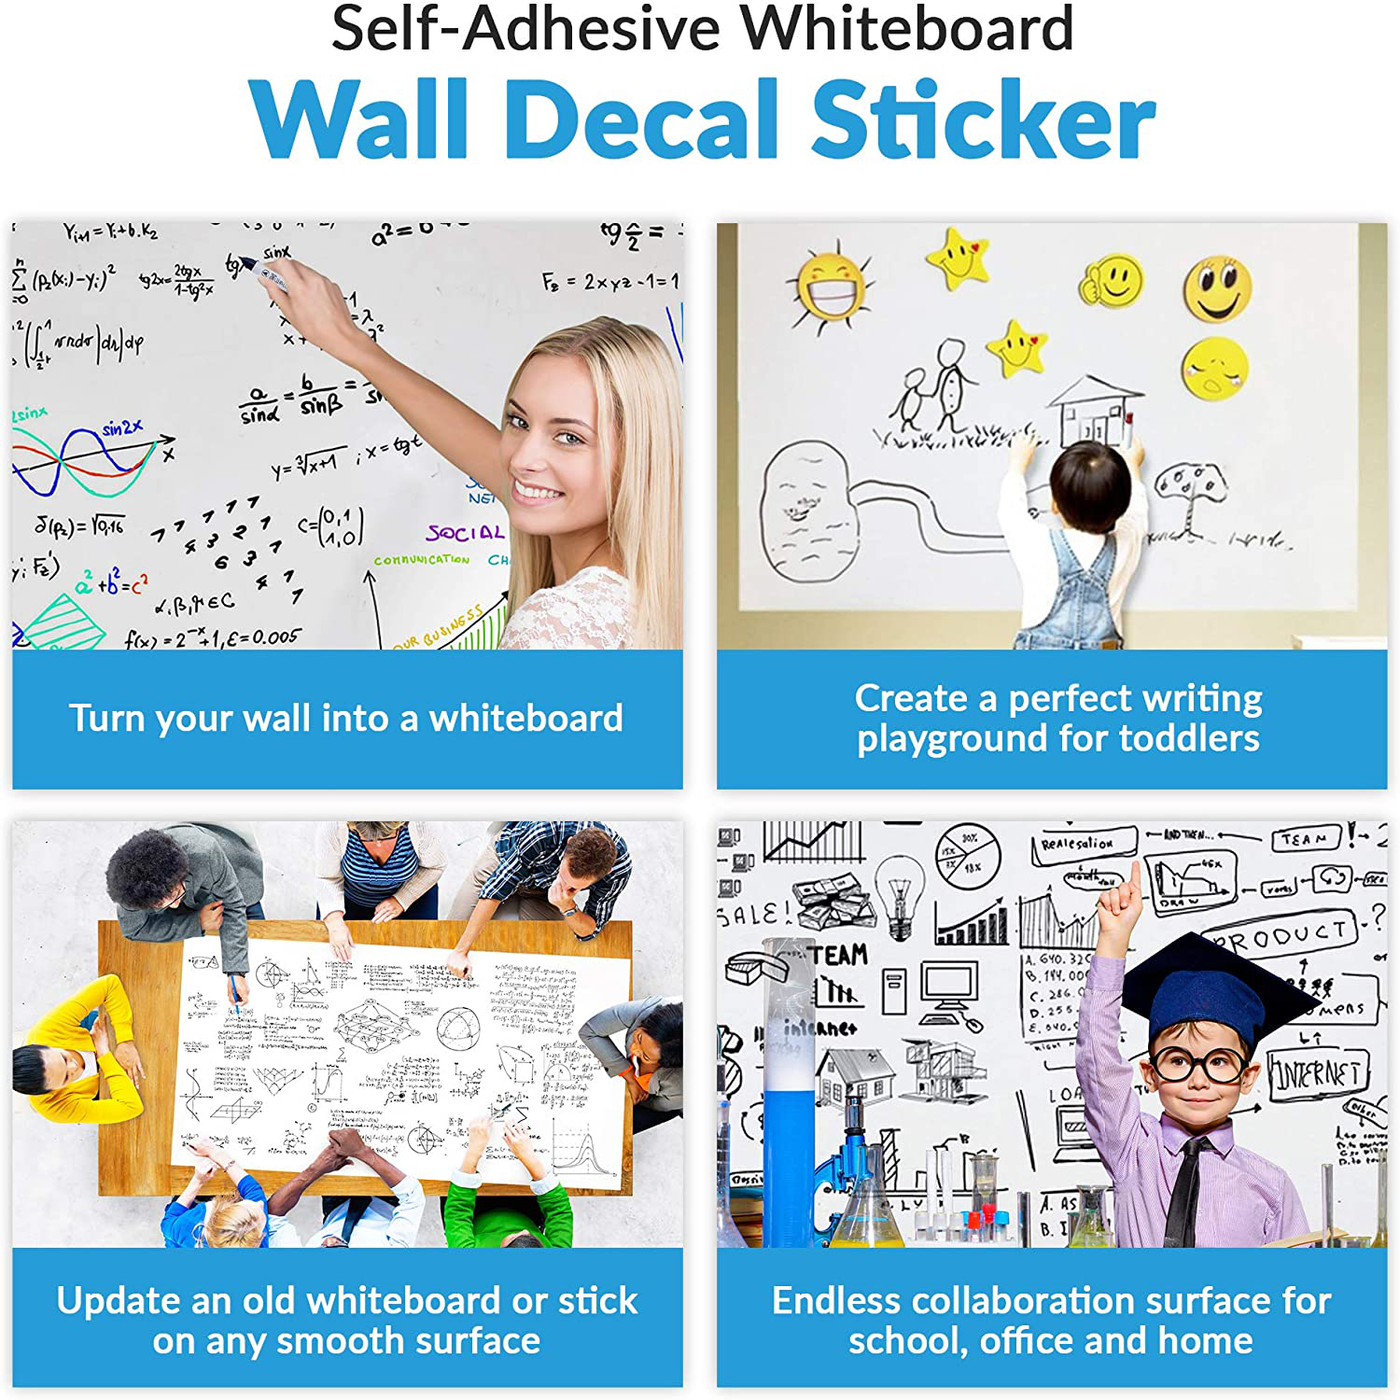 Extra Large Whiteboard Decal Sticker, Self-Adhesive Paper Message Board (6.5 FEET) Peel and Stick Wallpaper with 4 Dry Erase Markers, Size 17.7” X 78.7”